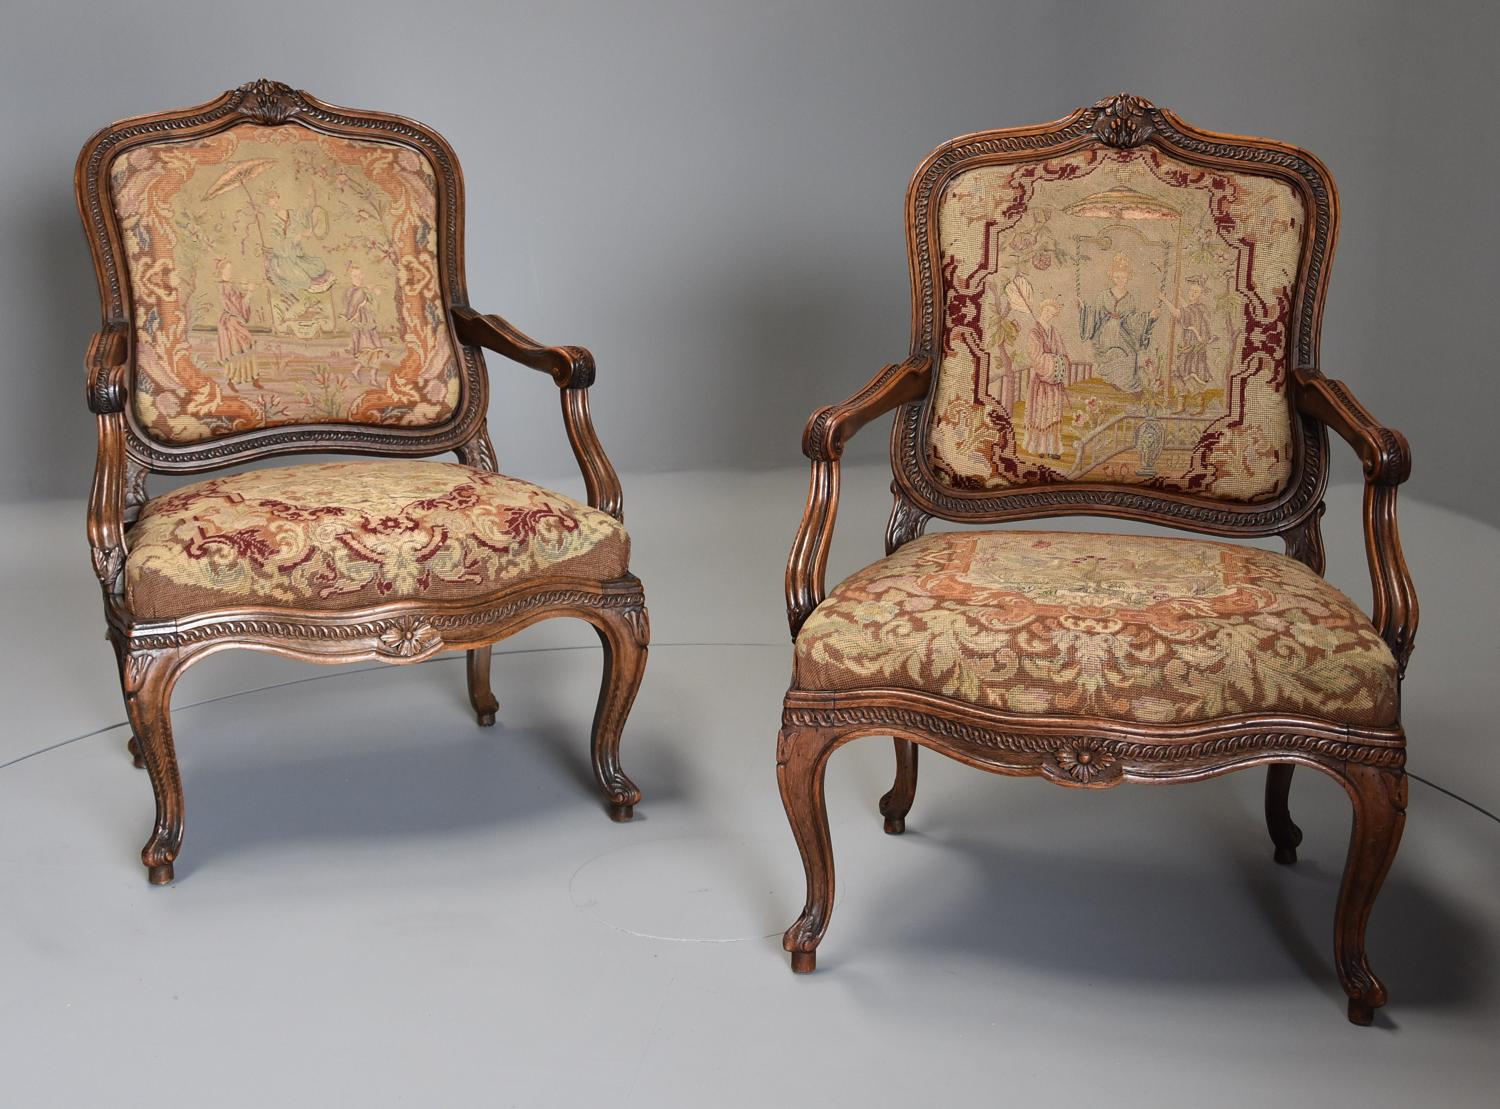 Pair of French fauteuils of large proportion with original needlework